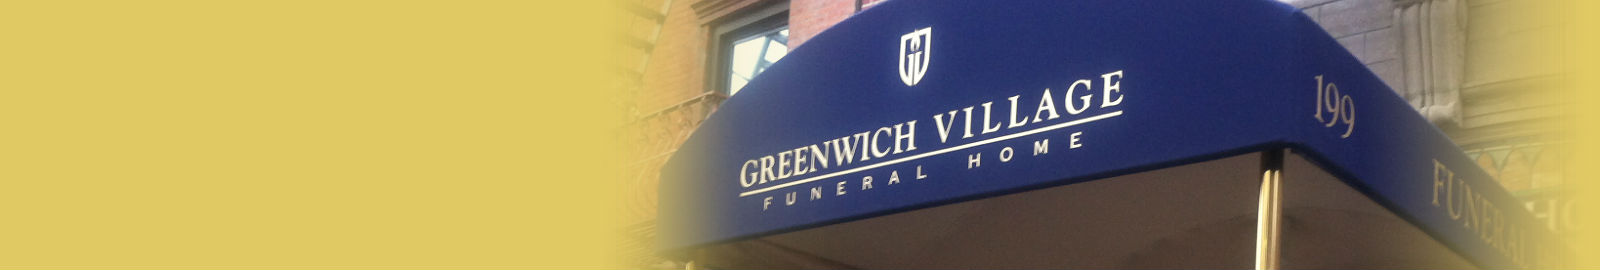 Greenwich Village Funeral Home Awning Photo